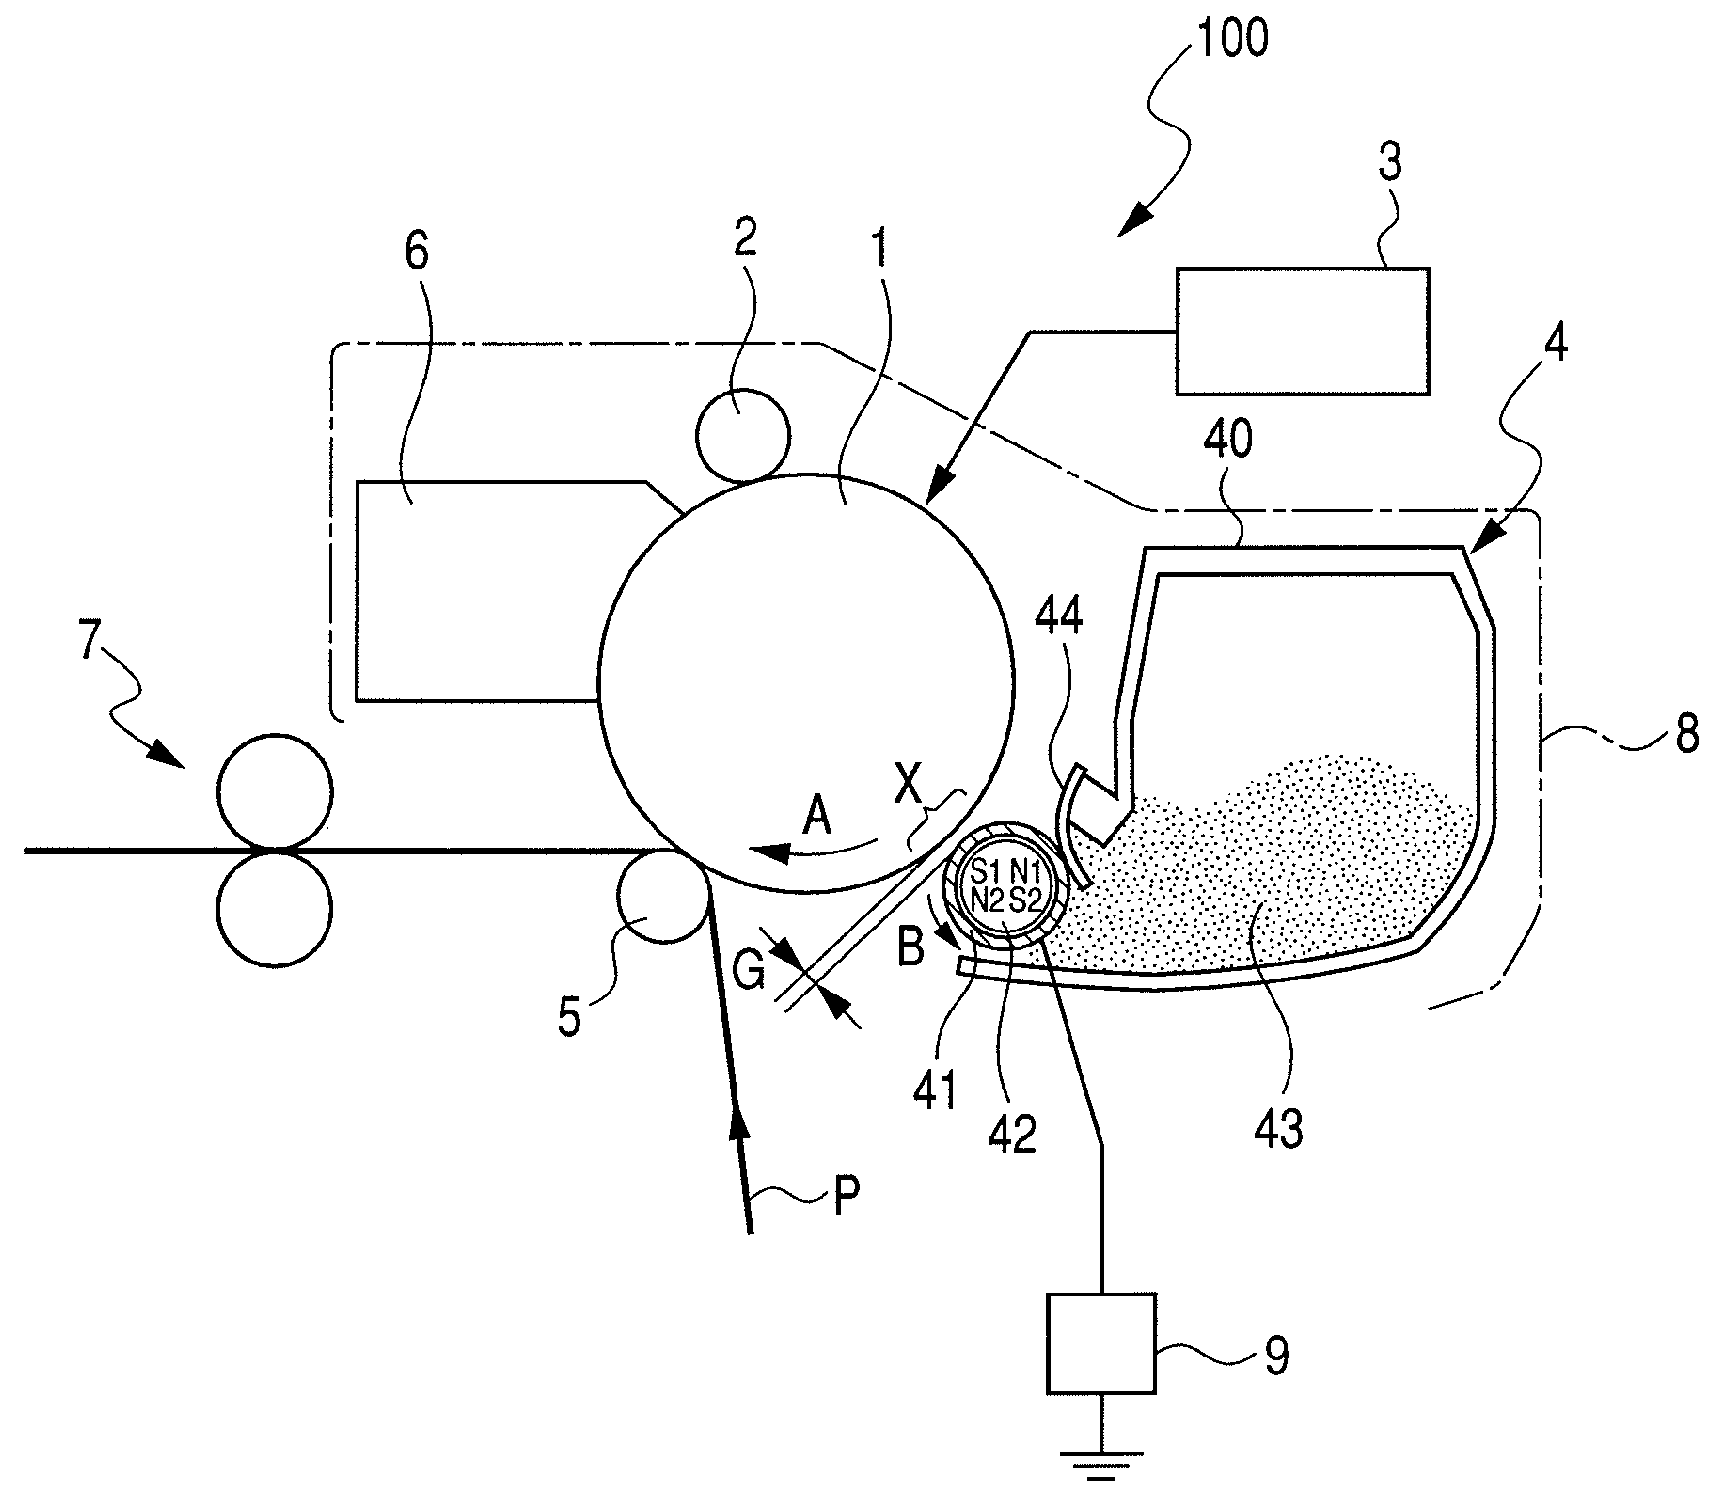 Developing apparatus including a cylindrical developer carrying member conveying a magnetic mono-component developer